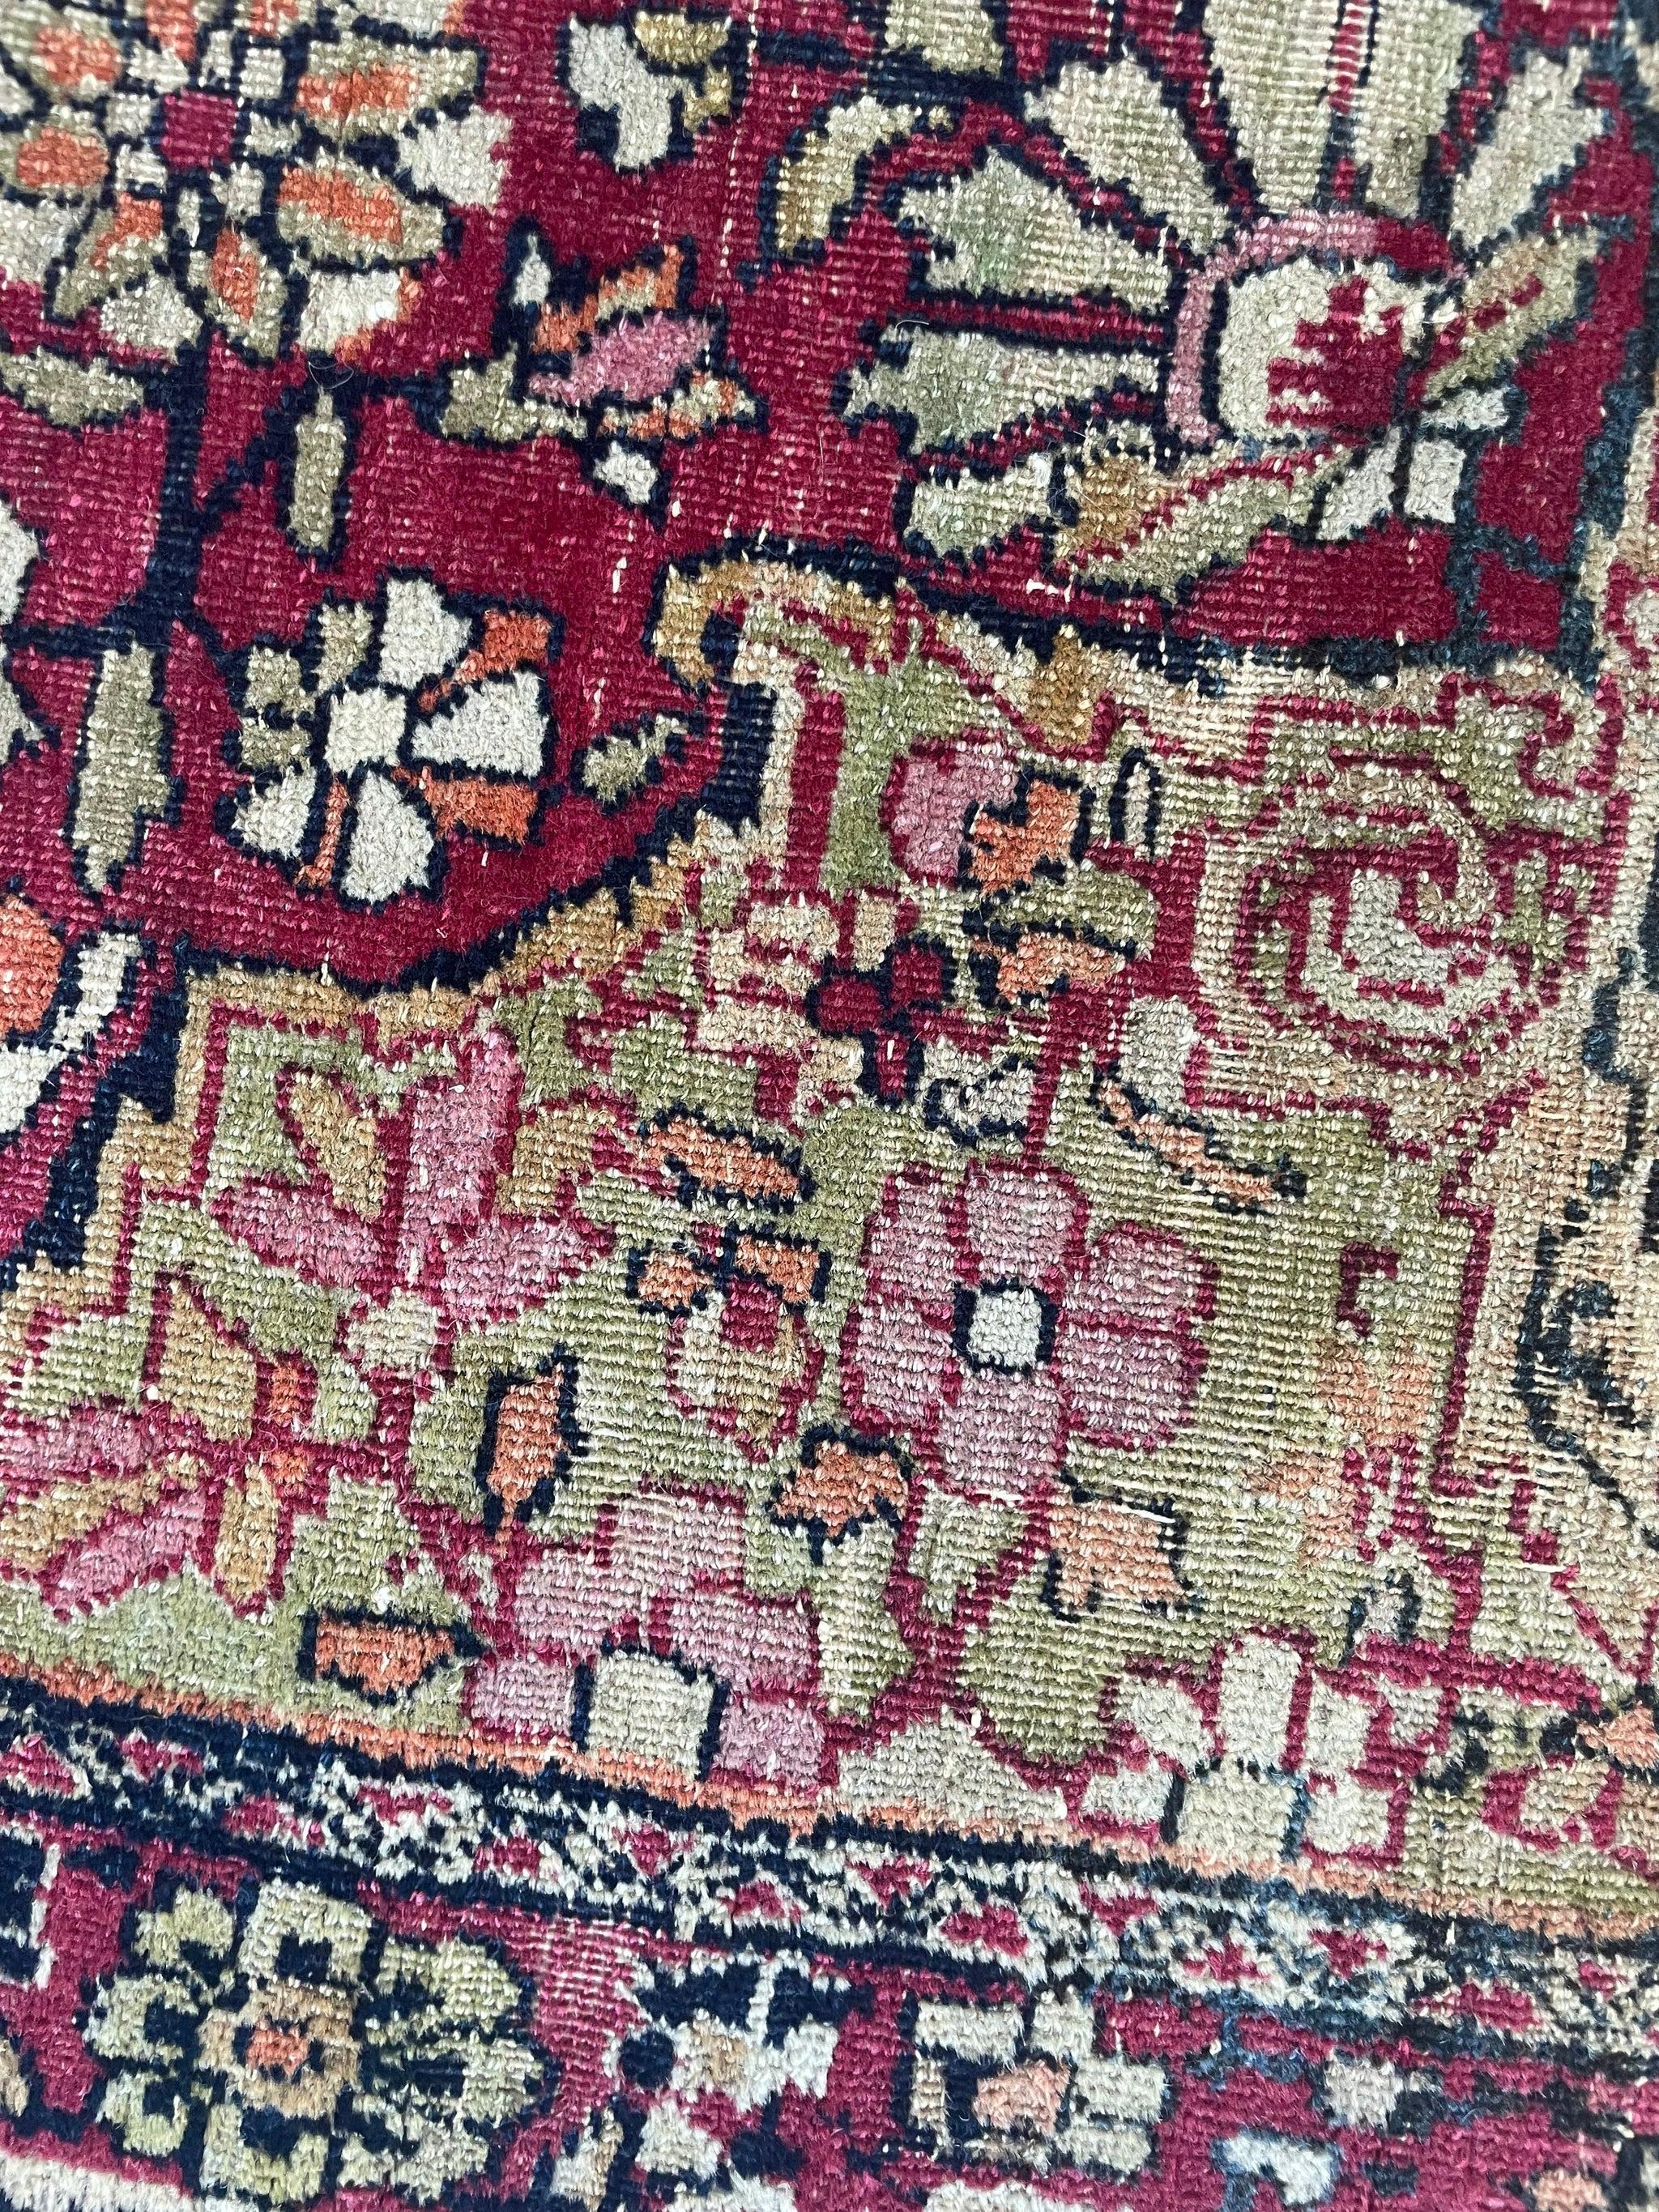 Antique Persian Kermanshah Rug with Unique Squarish Size, c. 1910-20's In Good Condition For Sale In Milwaukee, WI